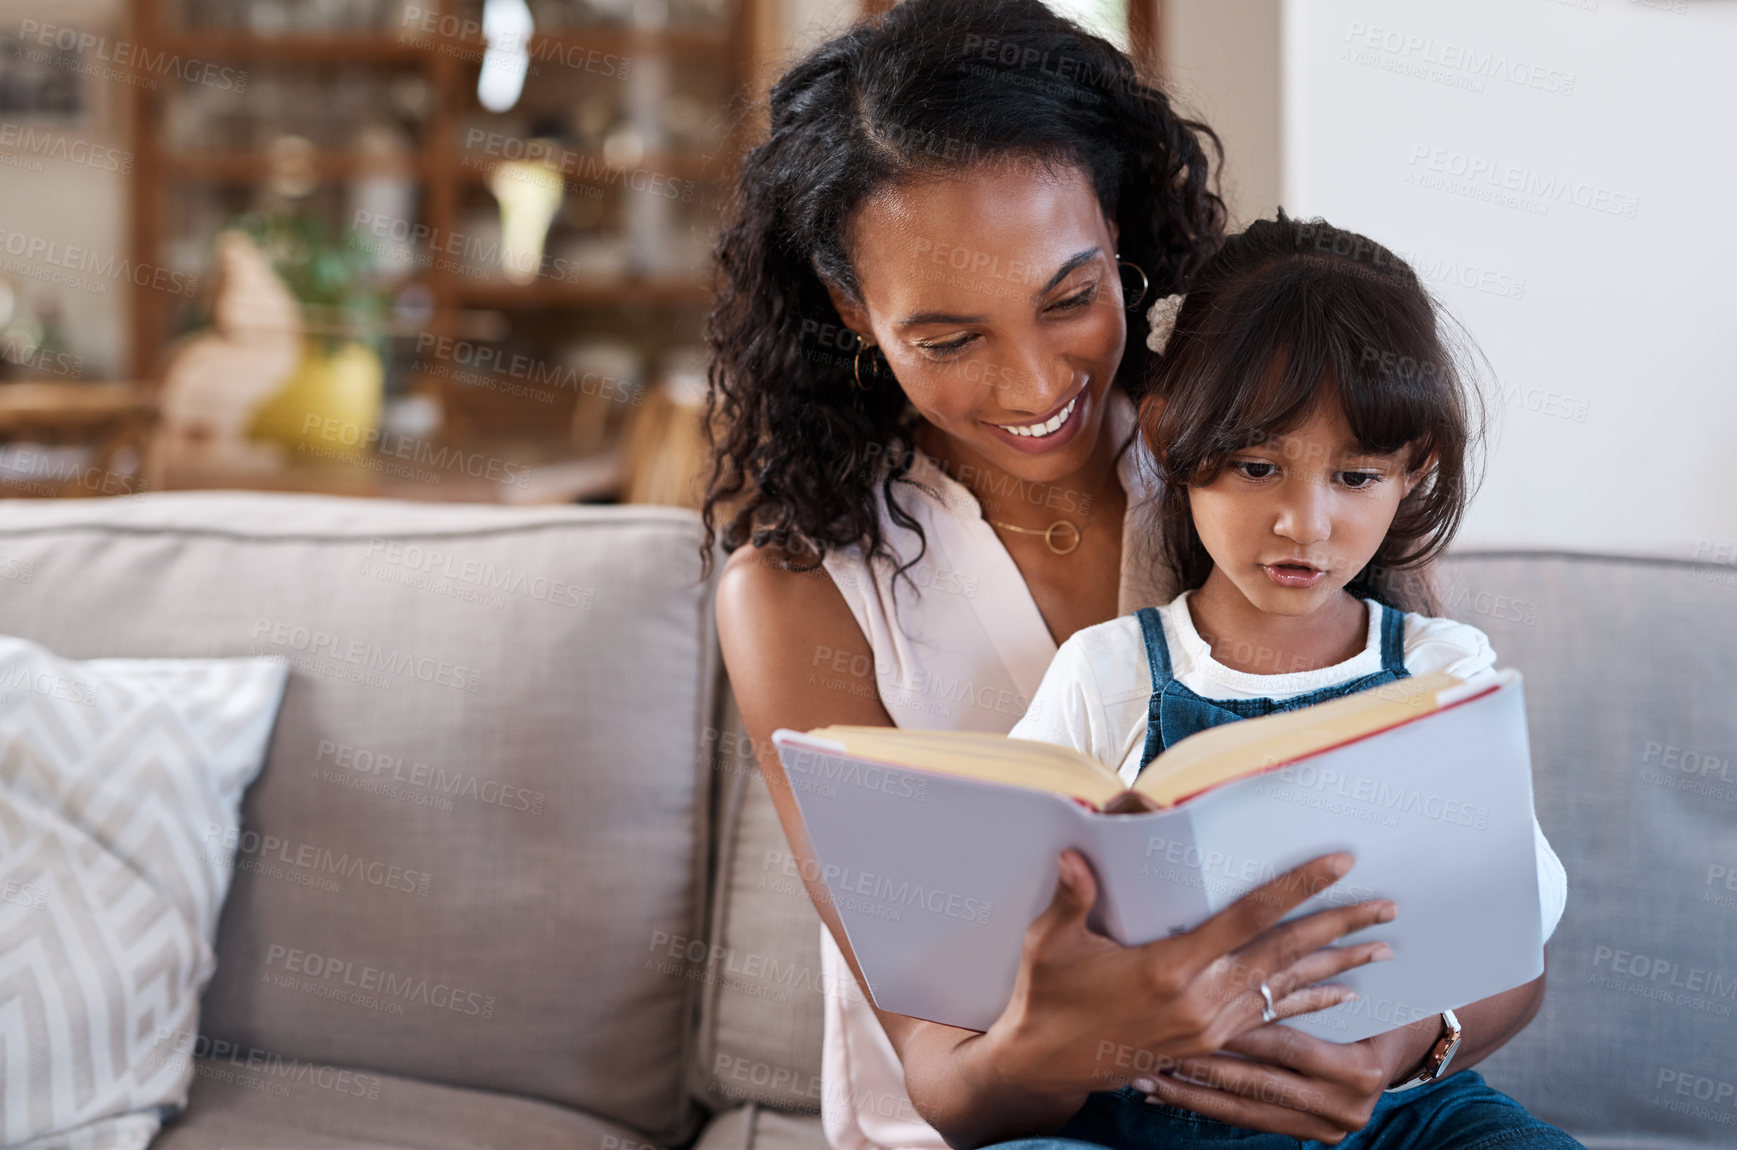 Buy stock photo Shot of a young girl reading a book while sitting with her mother at home